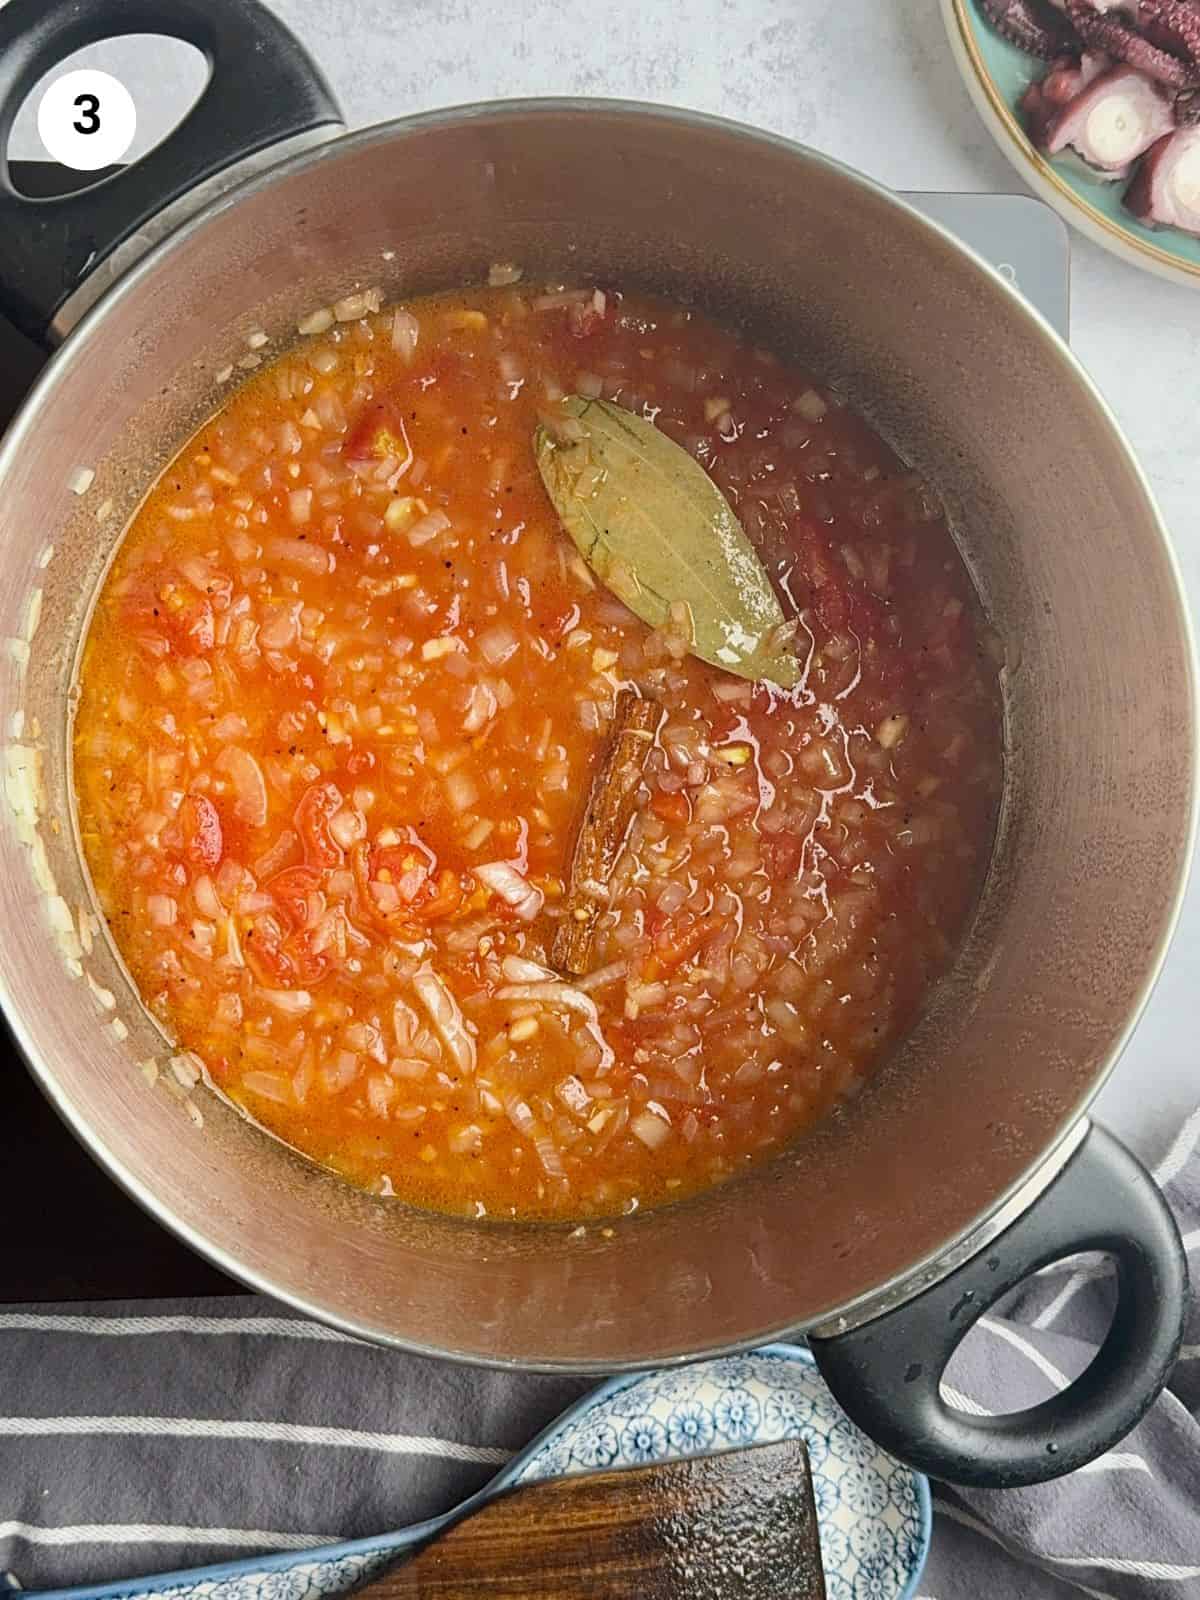 Cooking the tomatoes before adding the rest of the ingredients.